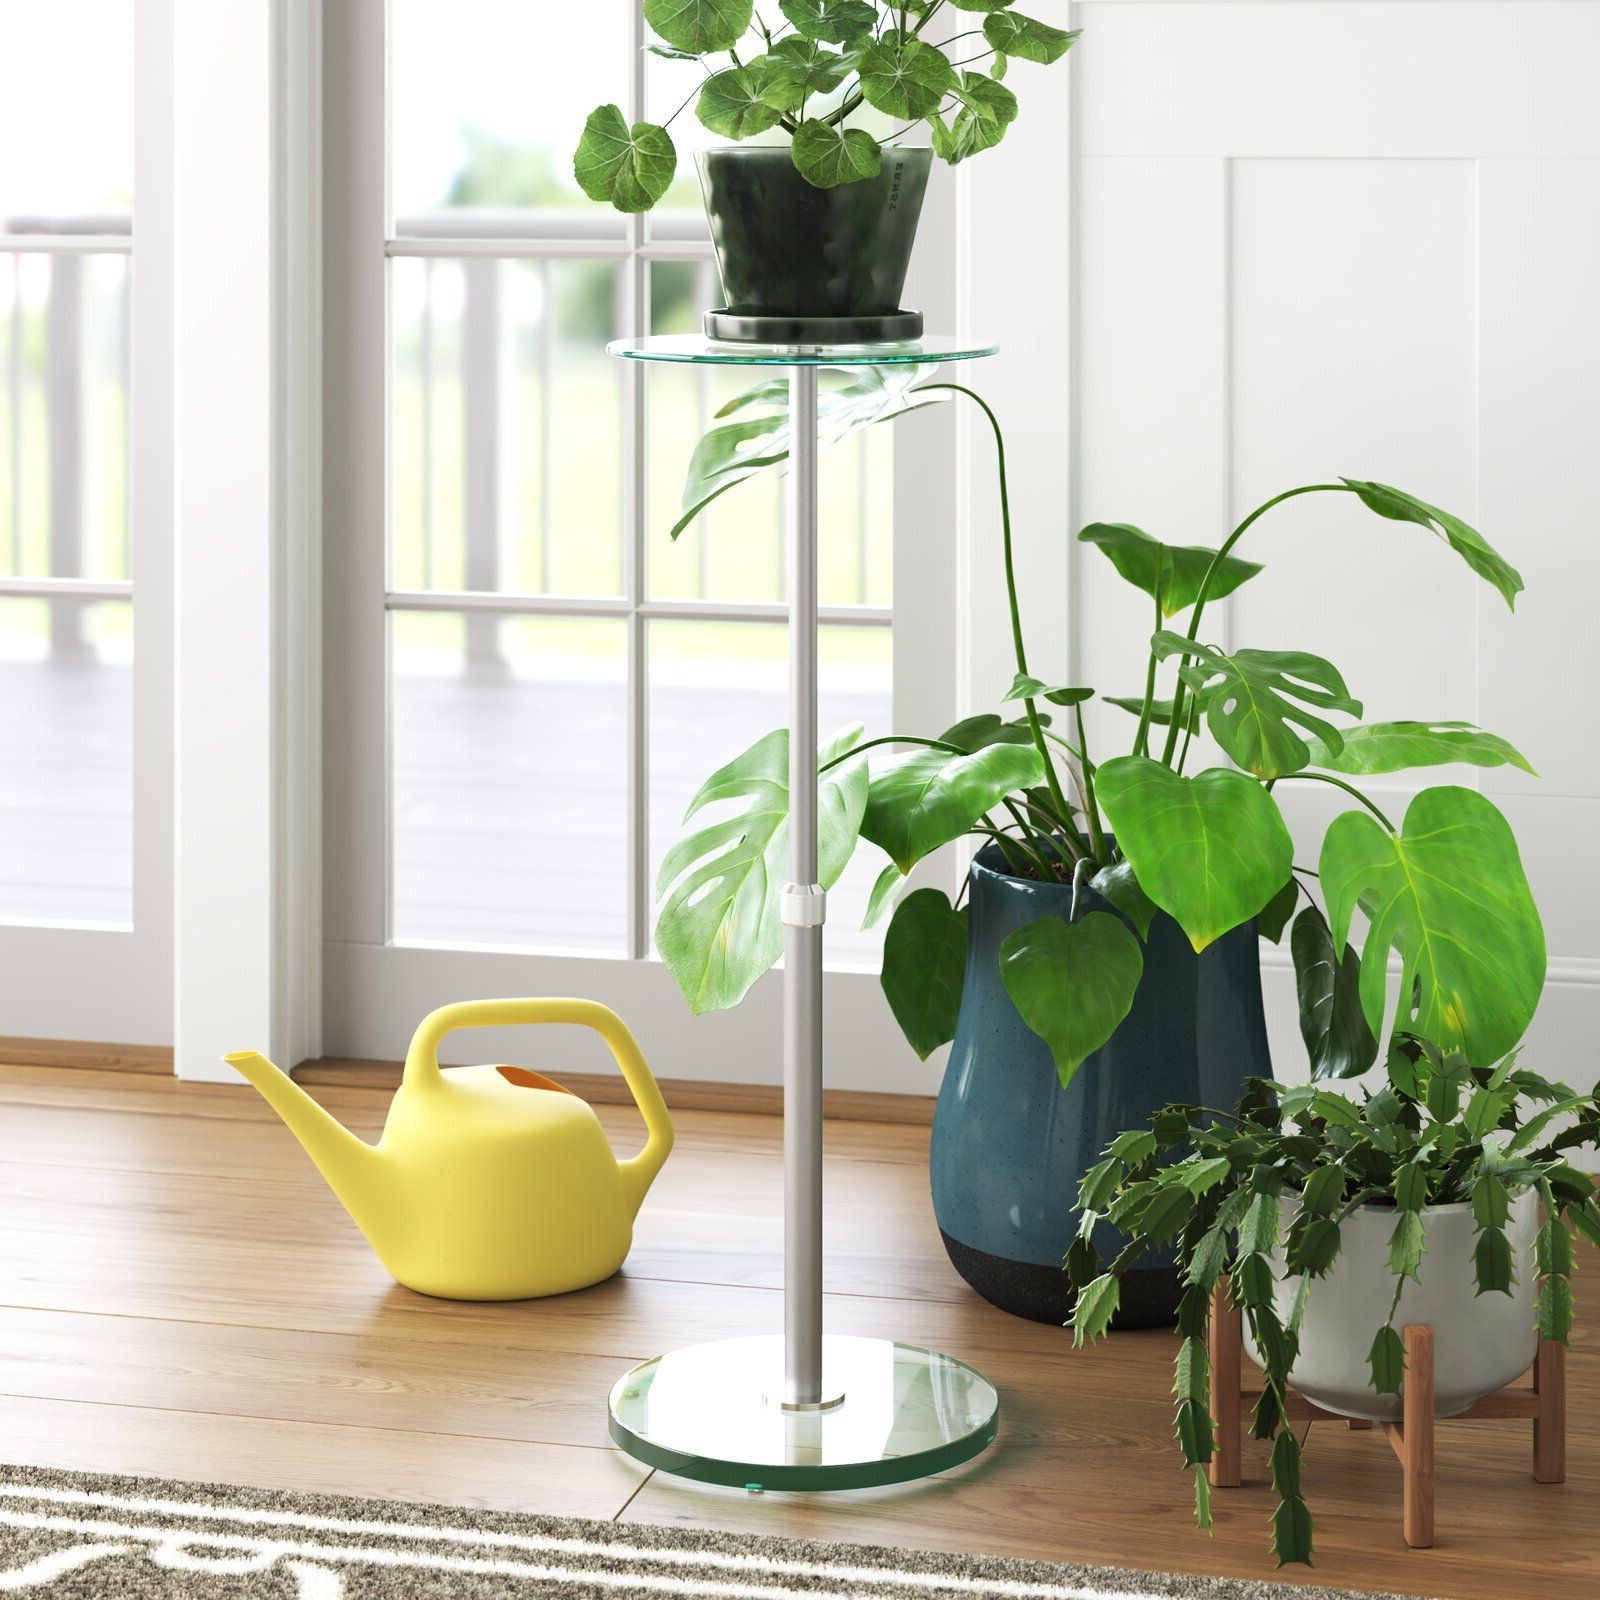 Cherry Pedestal Plant Stands Regarding Favorite Tall Pedestal Plant Stand – Ideas On Foter (View 15 of 15)